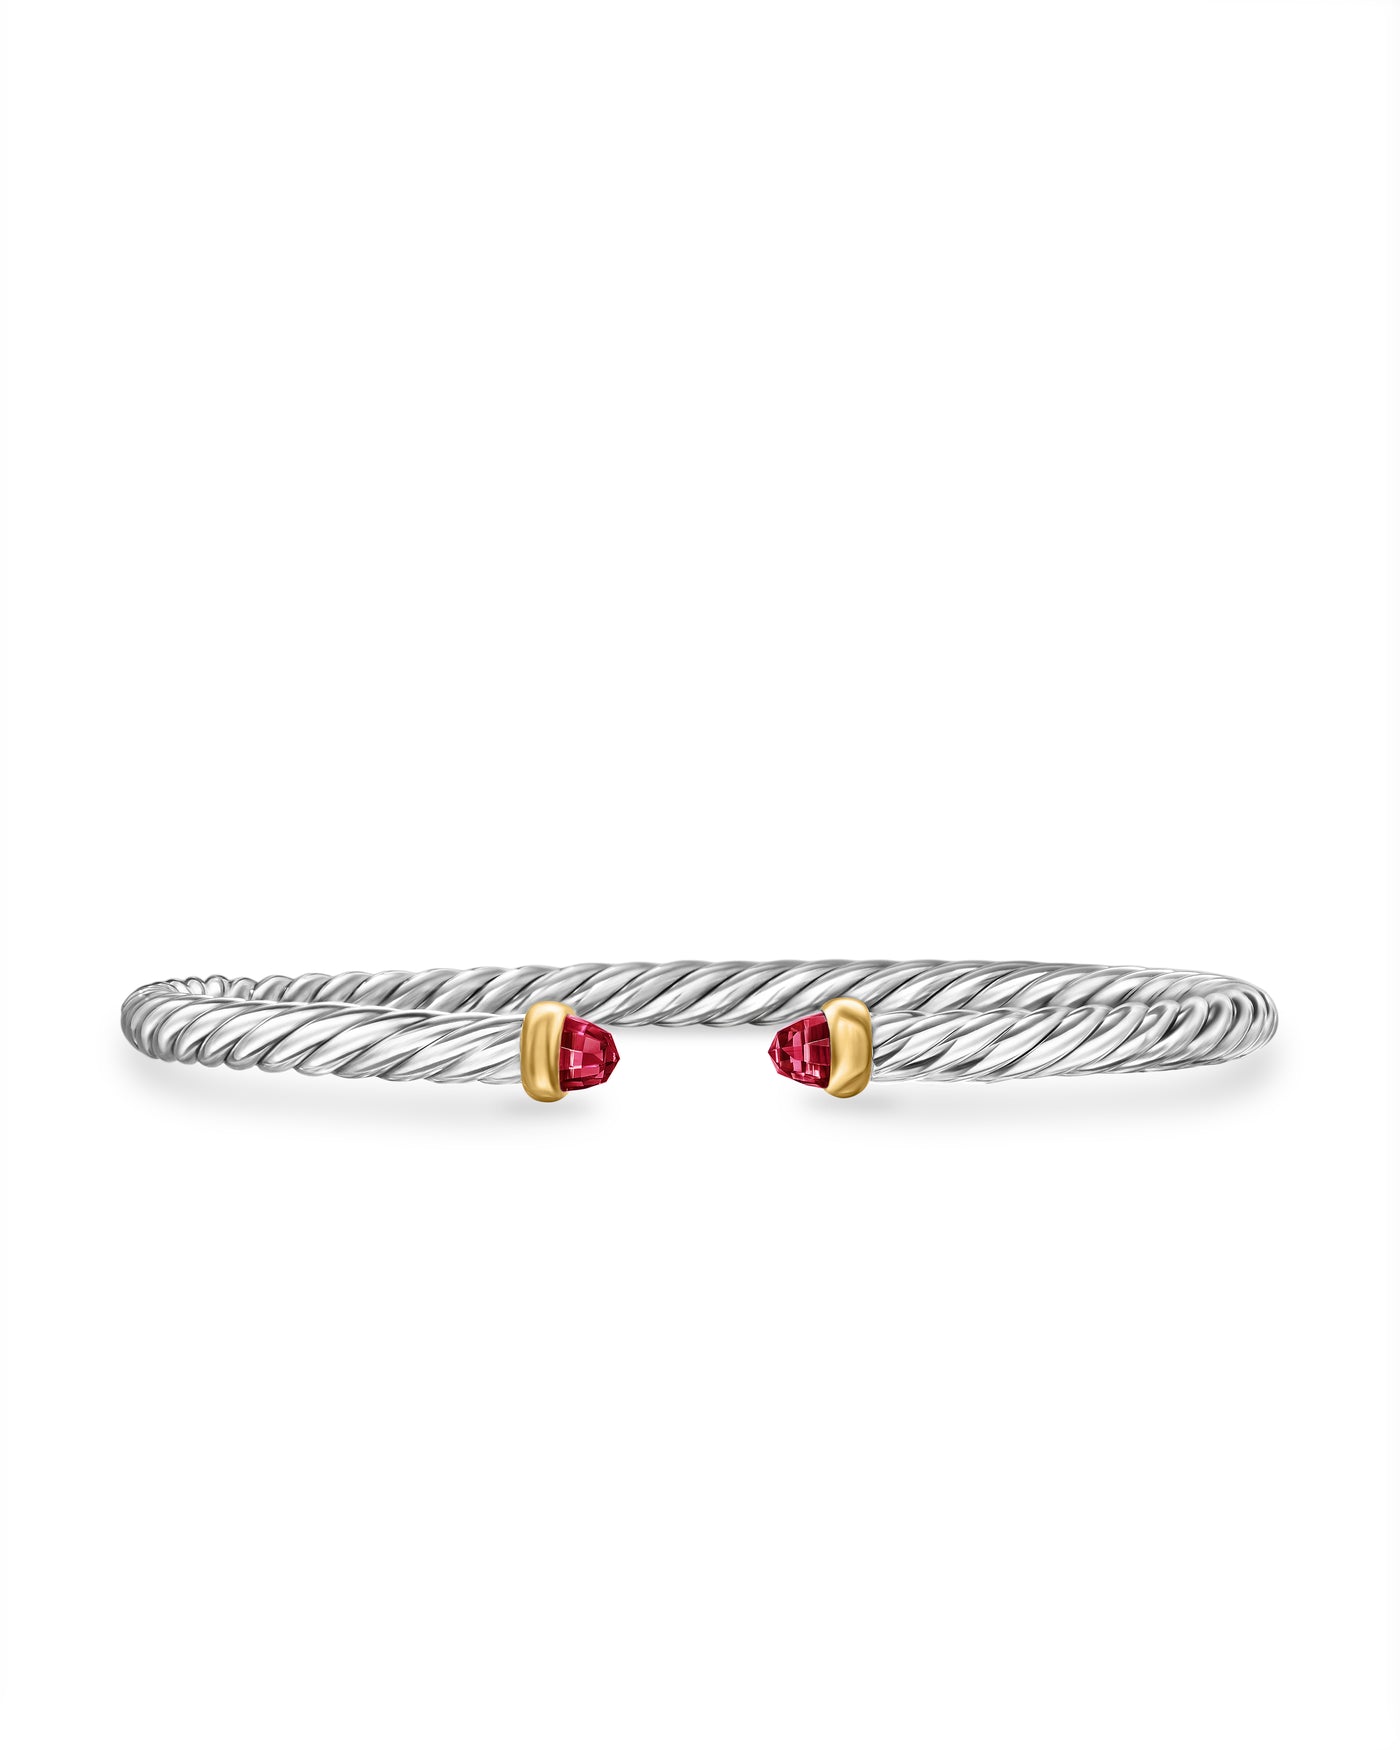 Modern Cable Bracelet in Sterling Silver with 14K Yellow Gold and Rhodolite Garnet\, 4mm